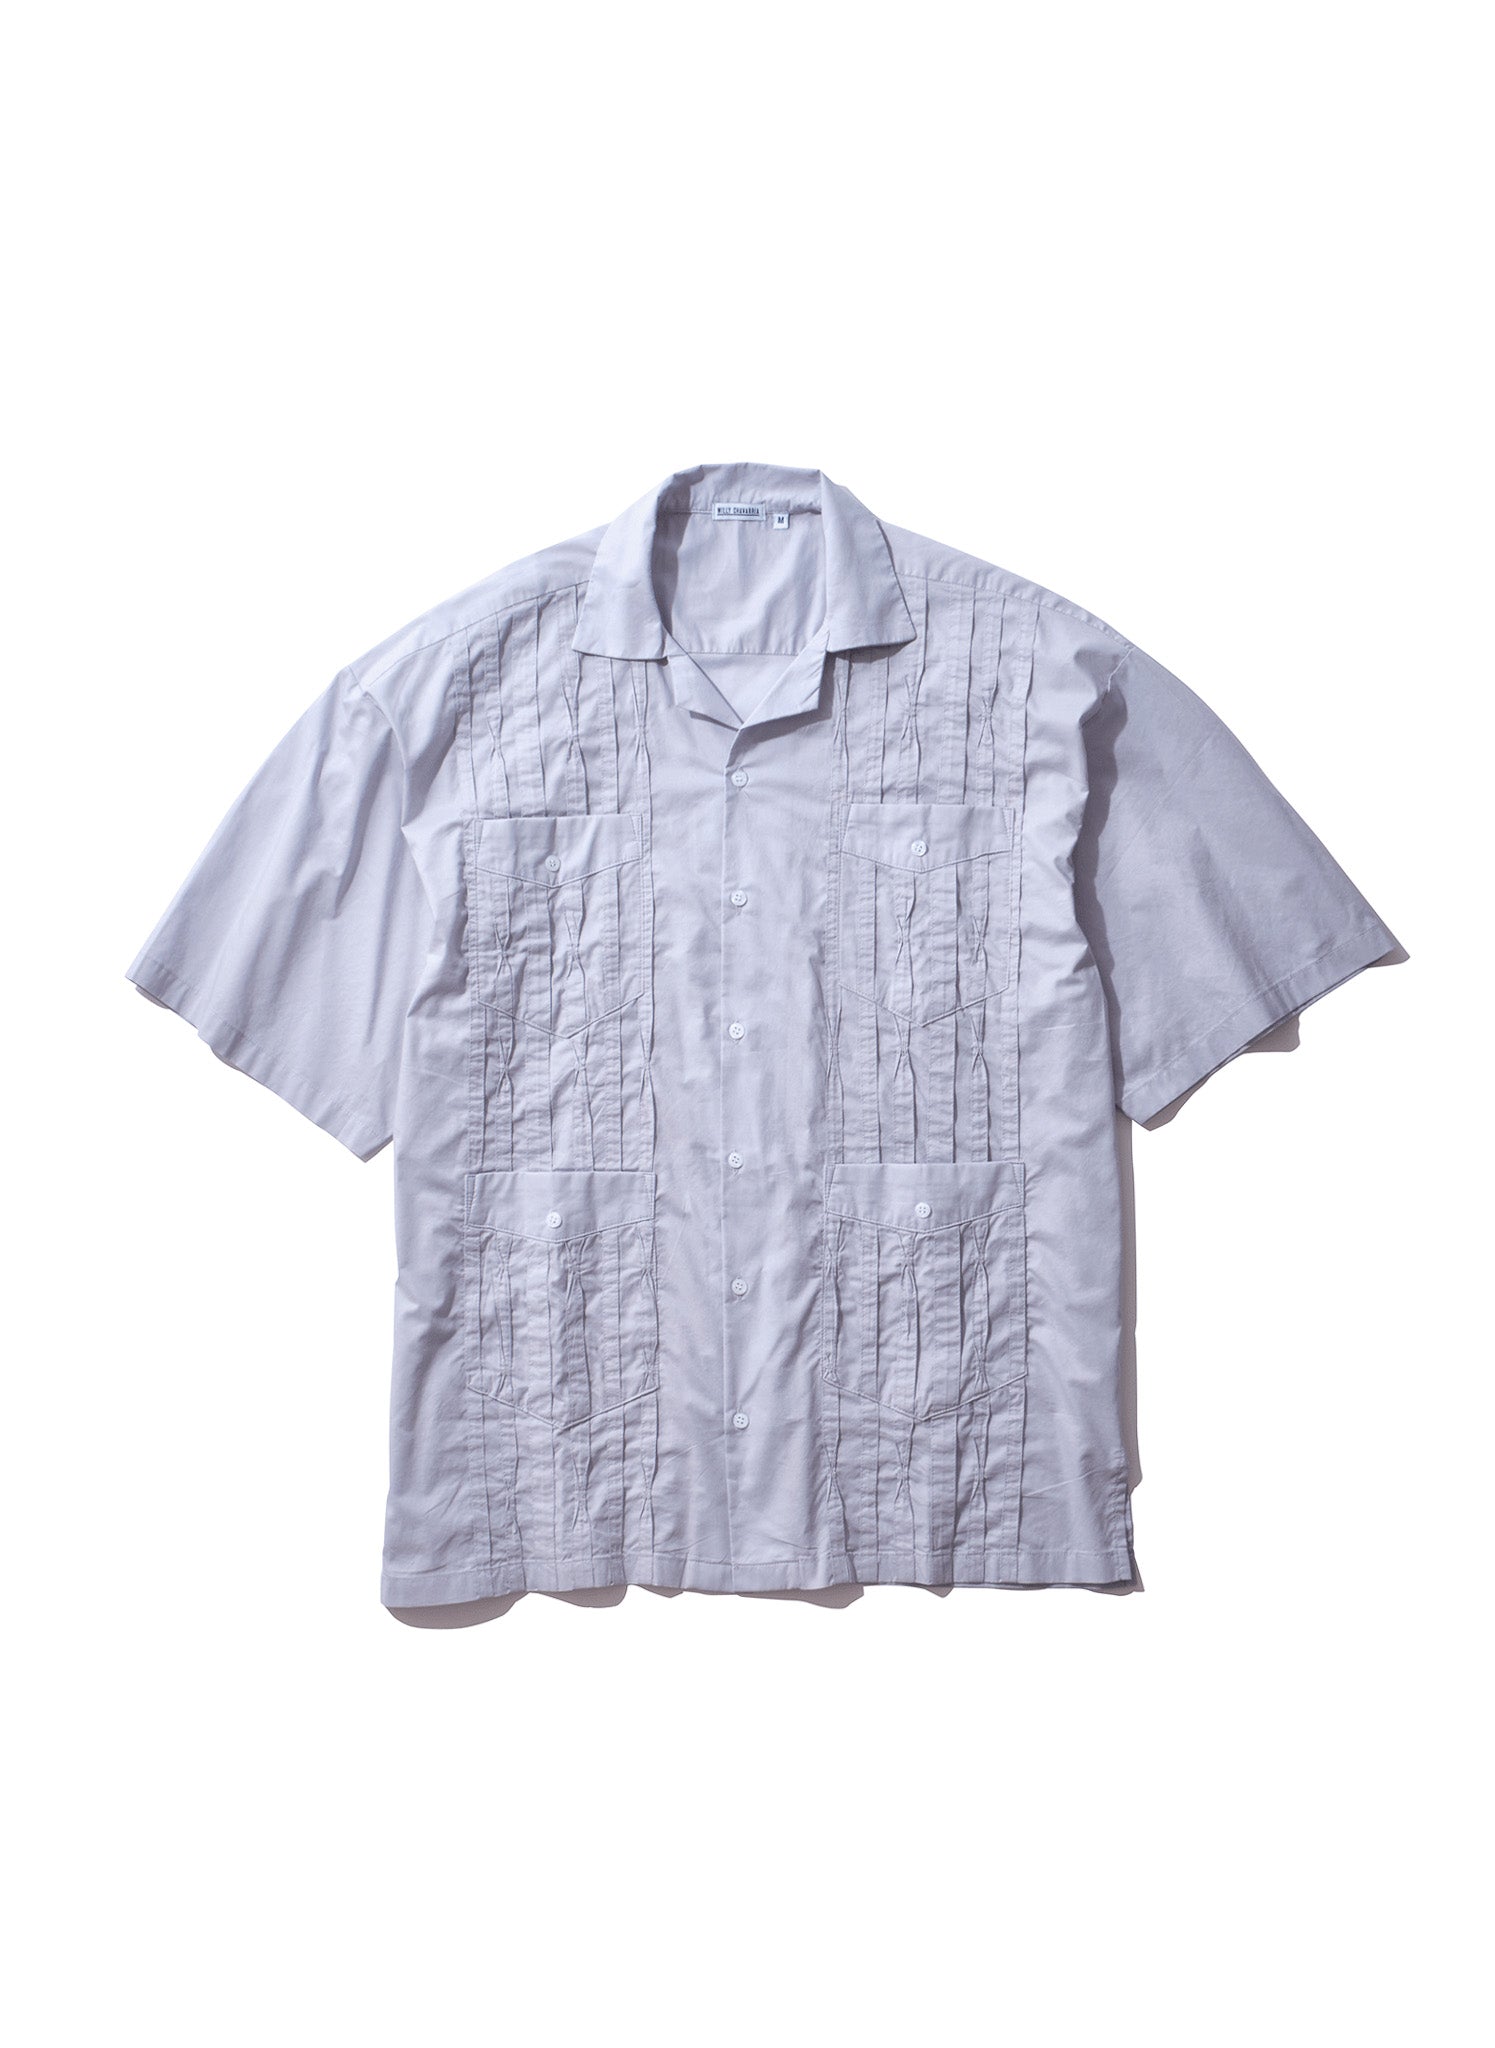 WILLY CHAVARRIA / DRESS PLEATED SHIRT SHADOW GRAY